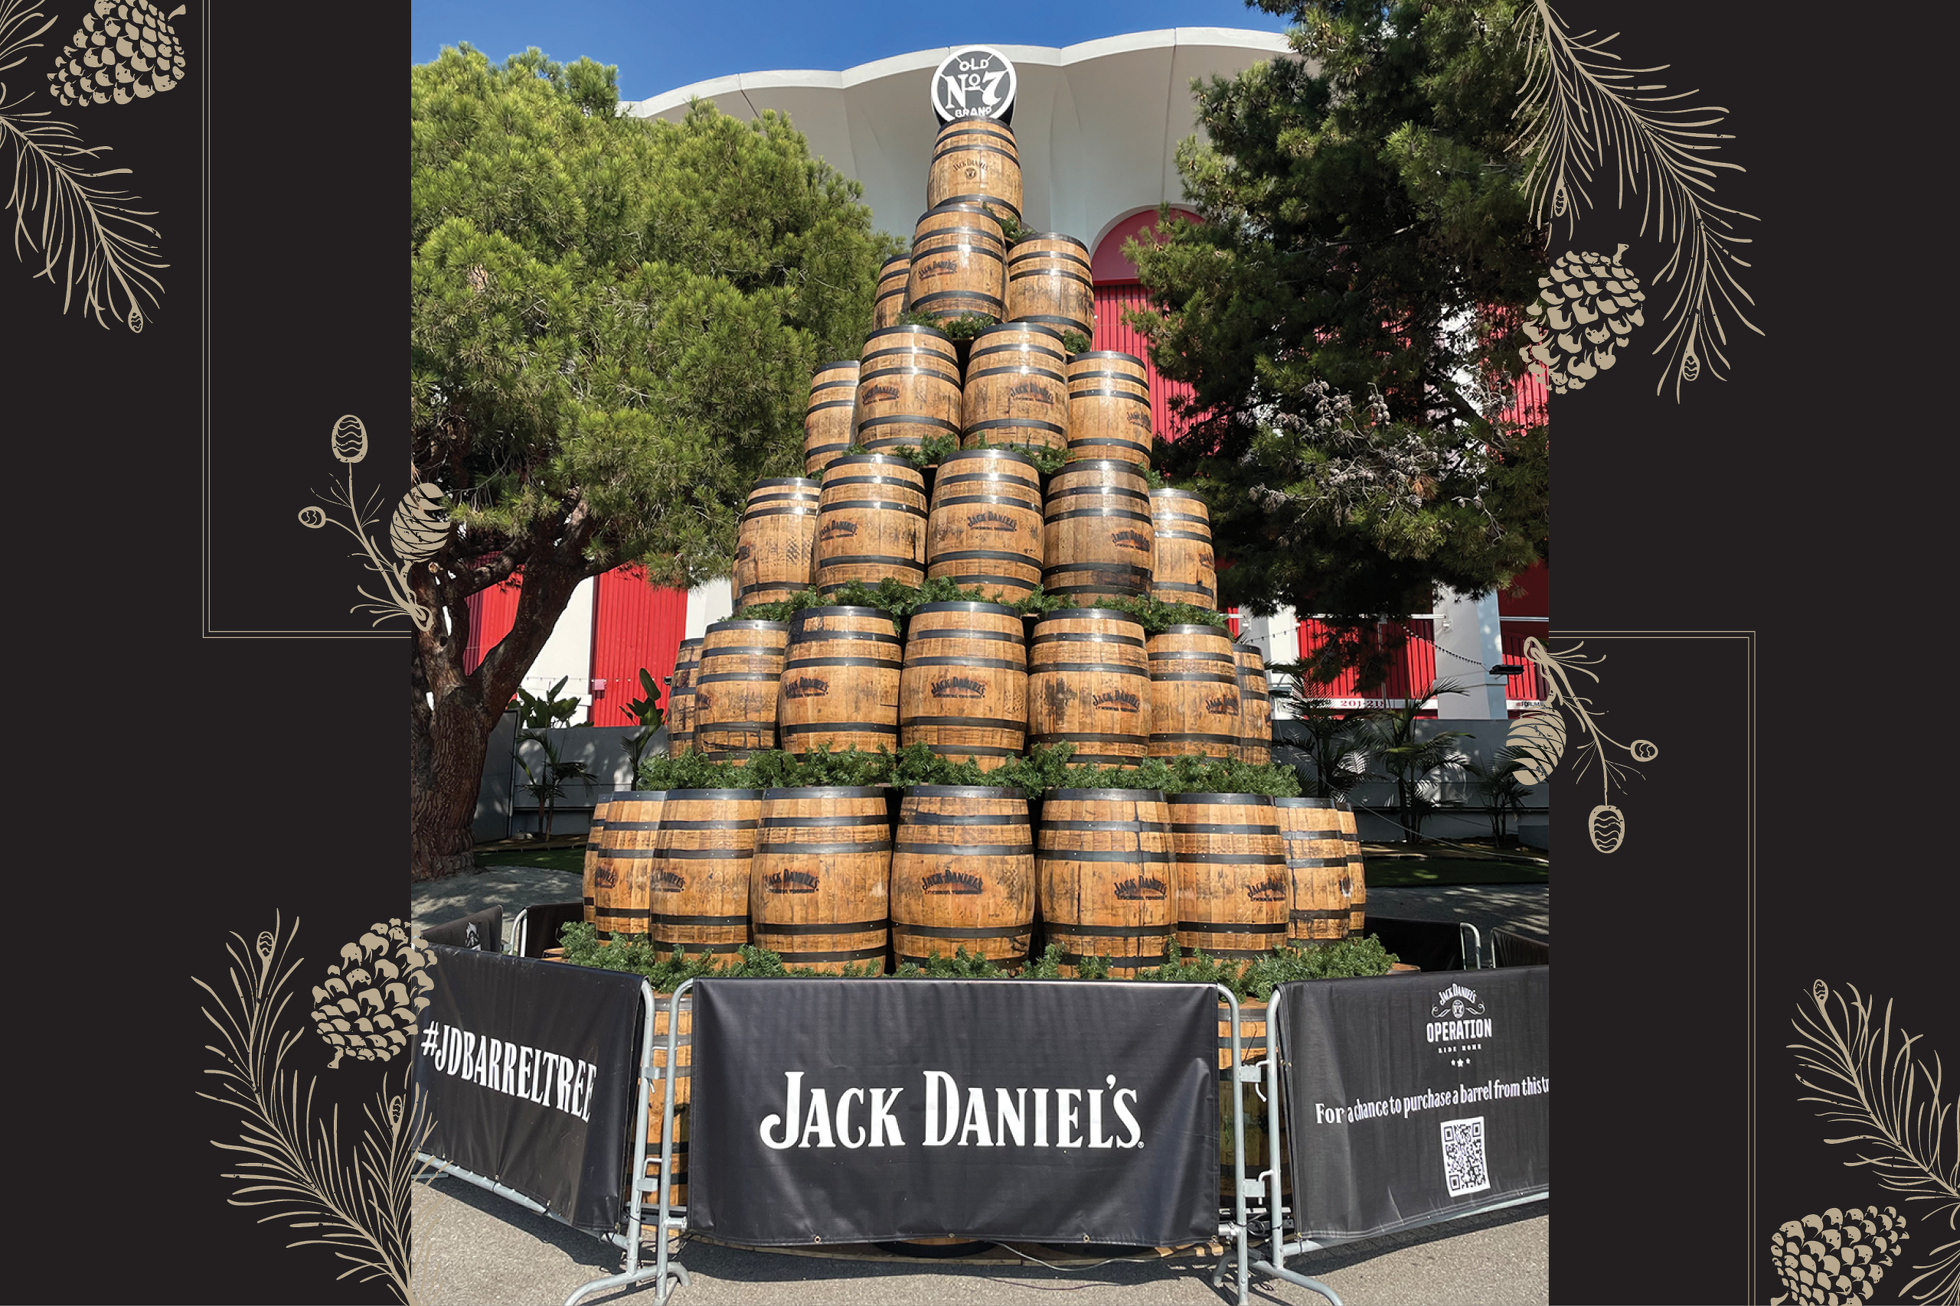 Top Barrel of the Holiday Tree from Los Angeles